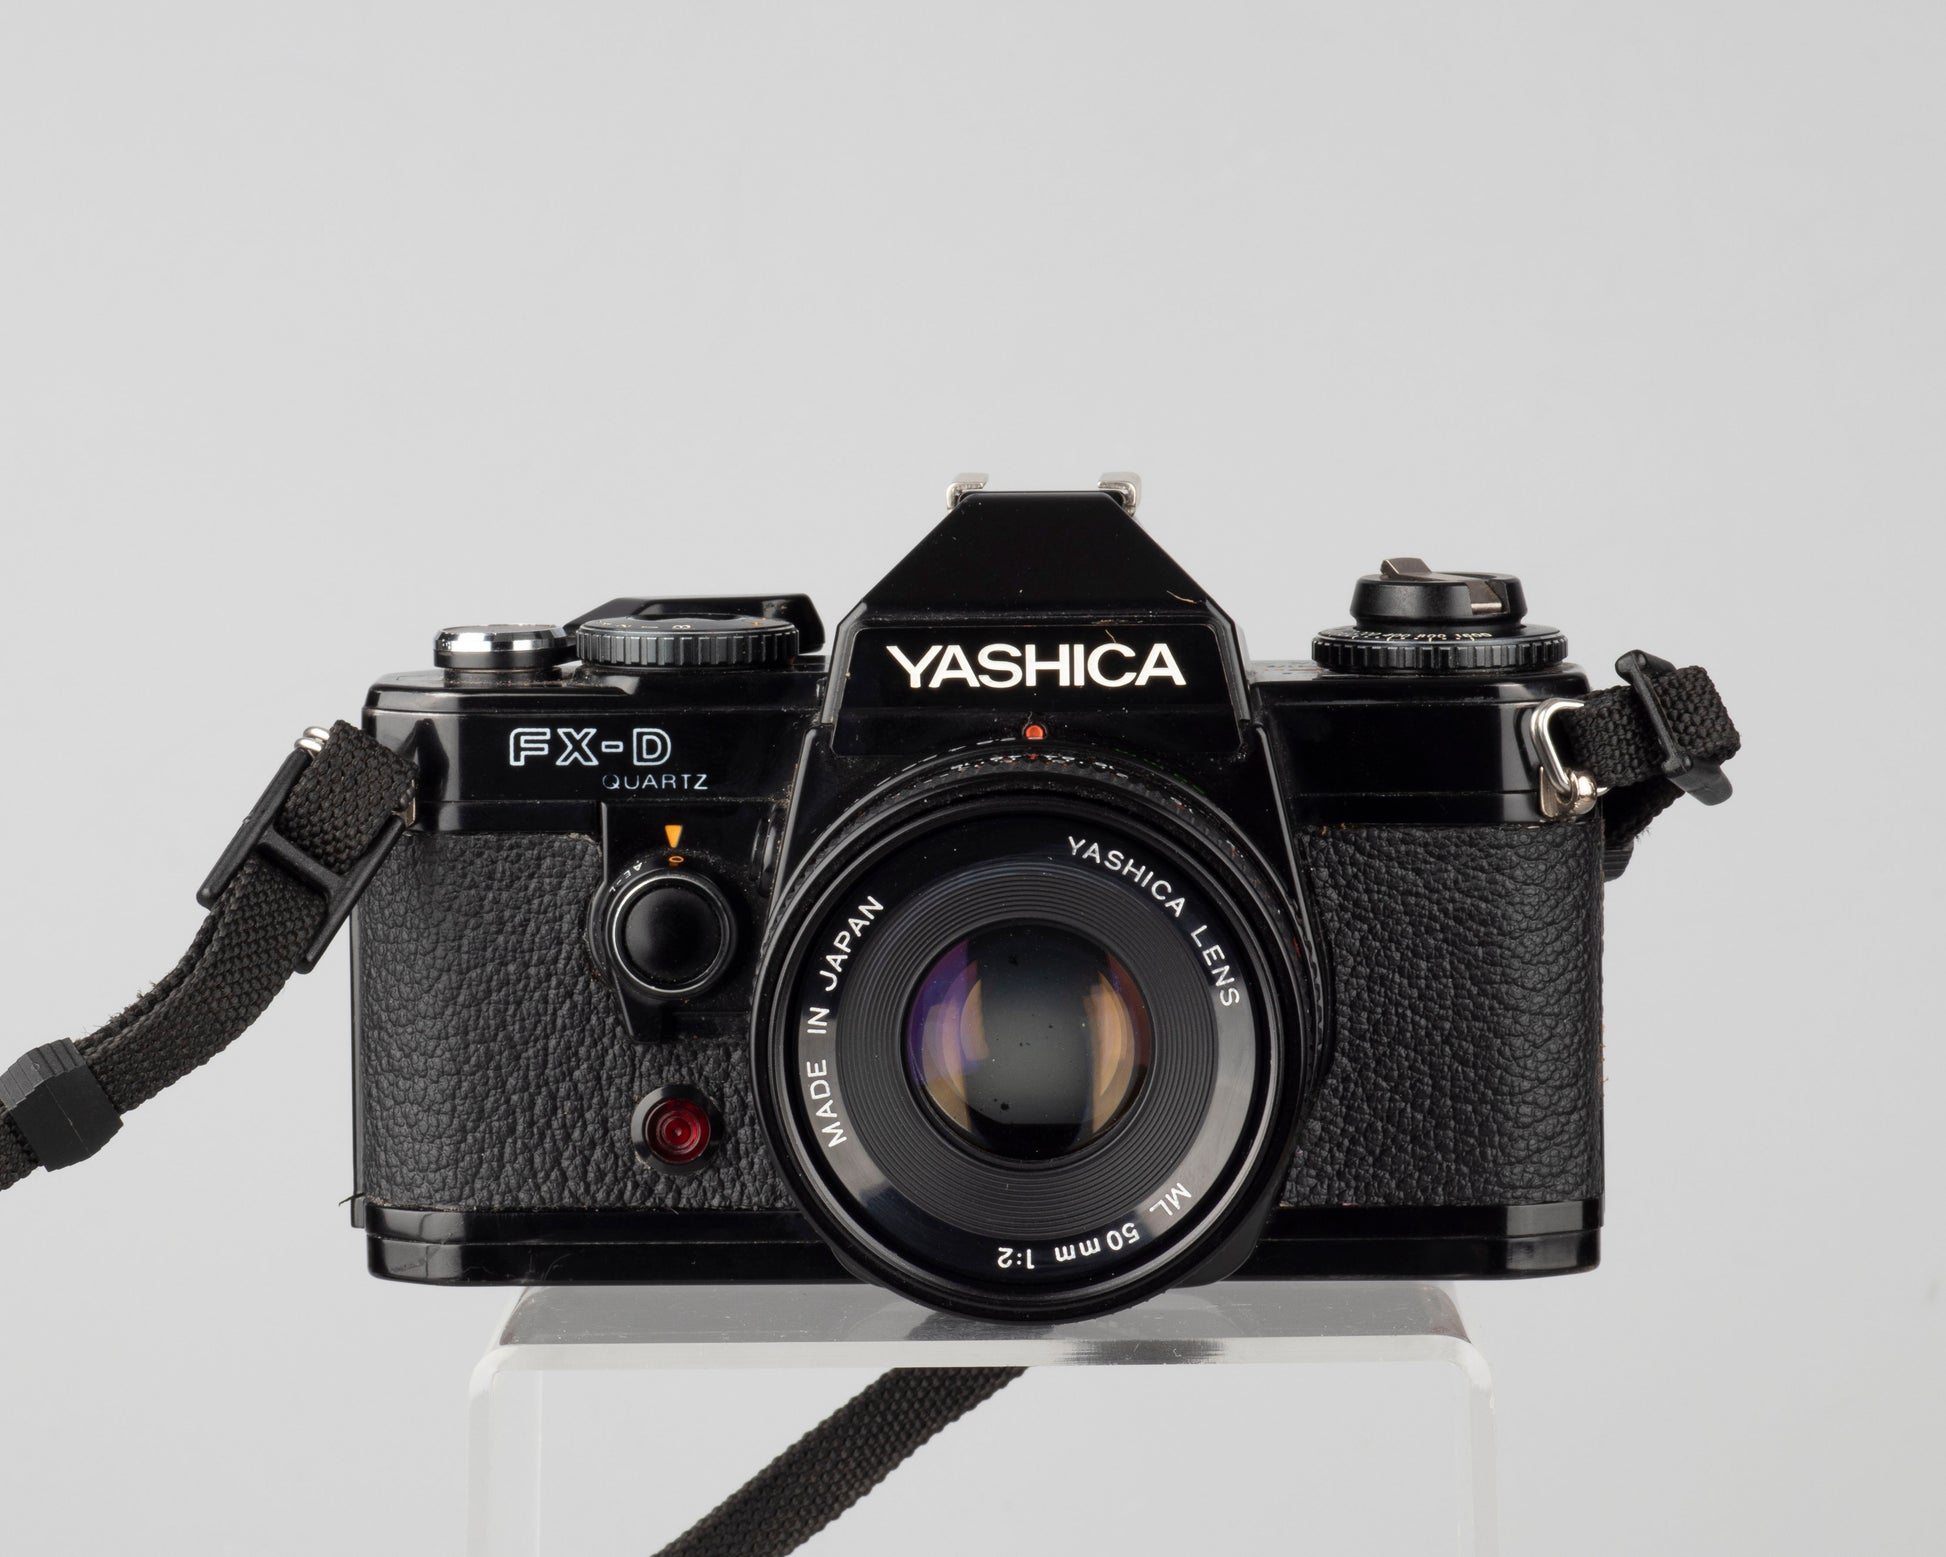 The Yashica FX-D is a quality 35mm SLR from the early 1980s